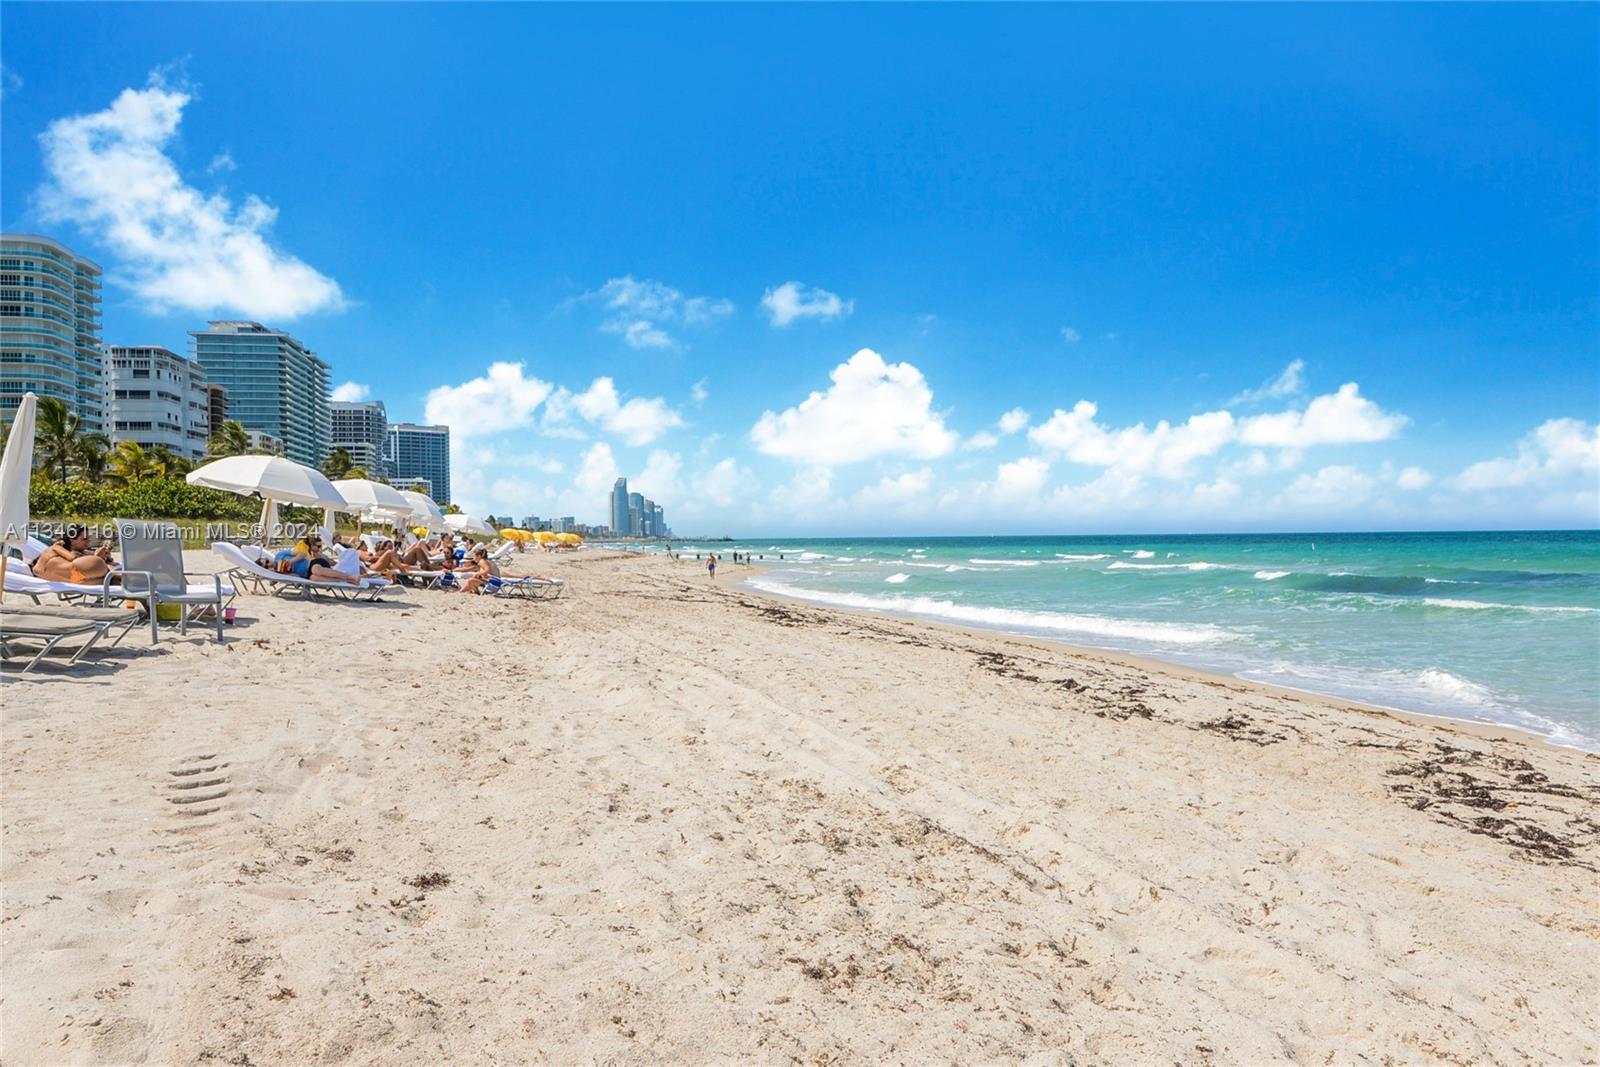 Balmoral Condo unit 3Z renting now, located at The Bal Harbour beach, Florida on the ocean. 1,984 SqFt 2 Bedrooms, 2 & 1/2 Baths. The building is under construction, doing the glass balconies and others.